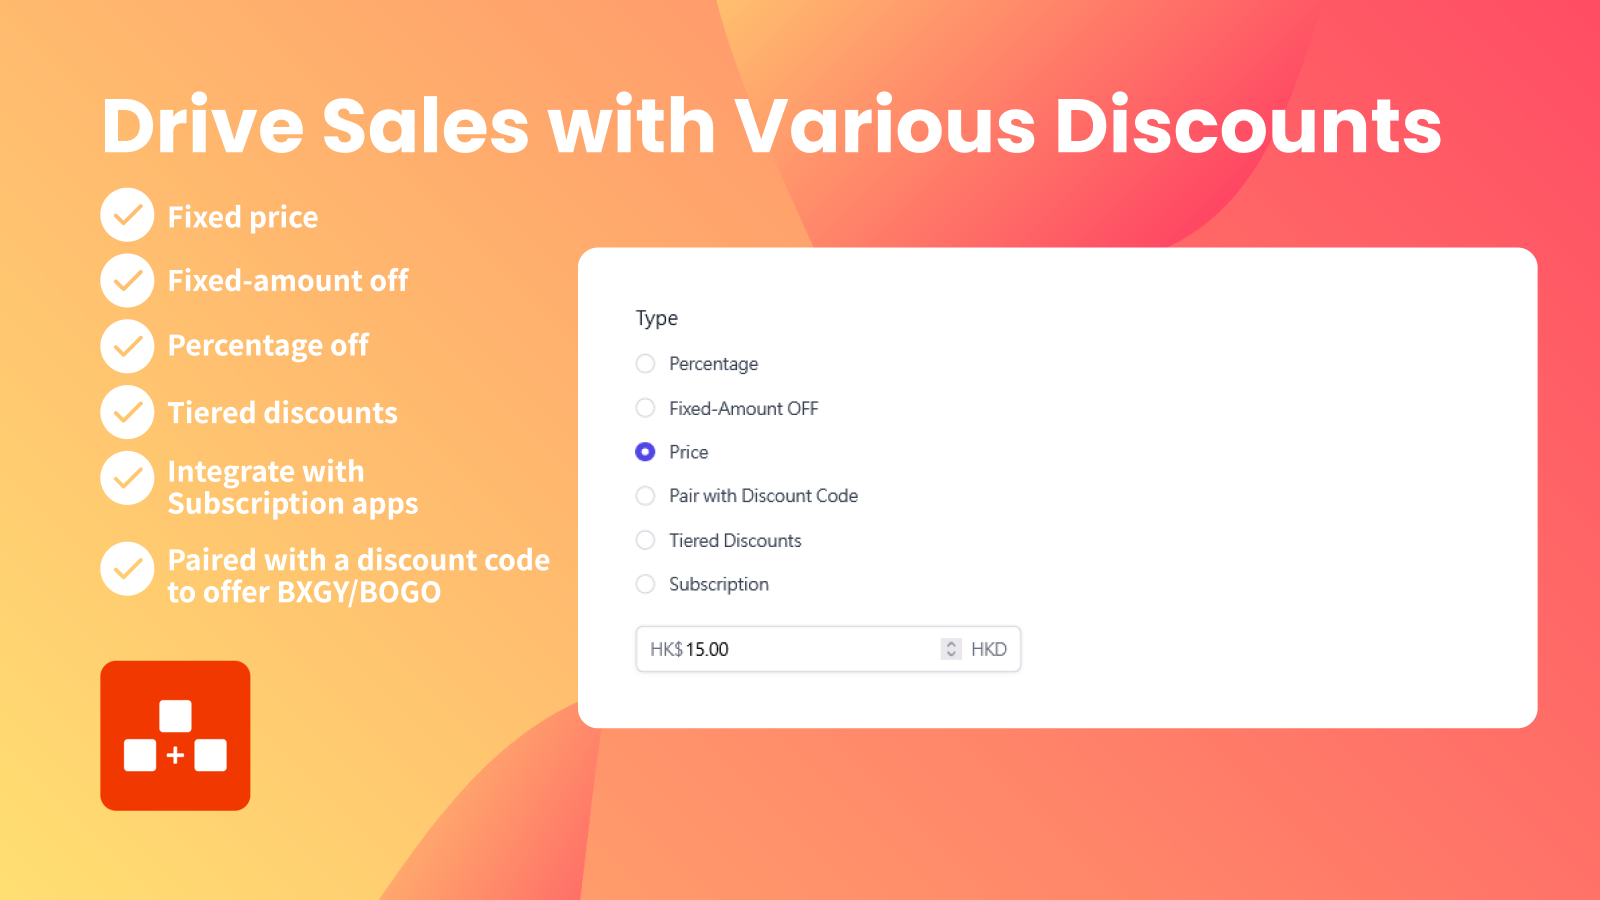 Drive sales with various discounts